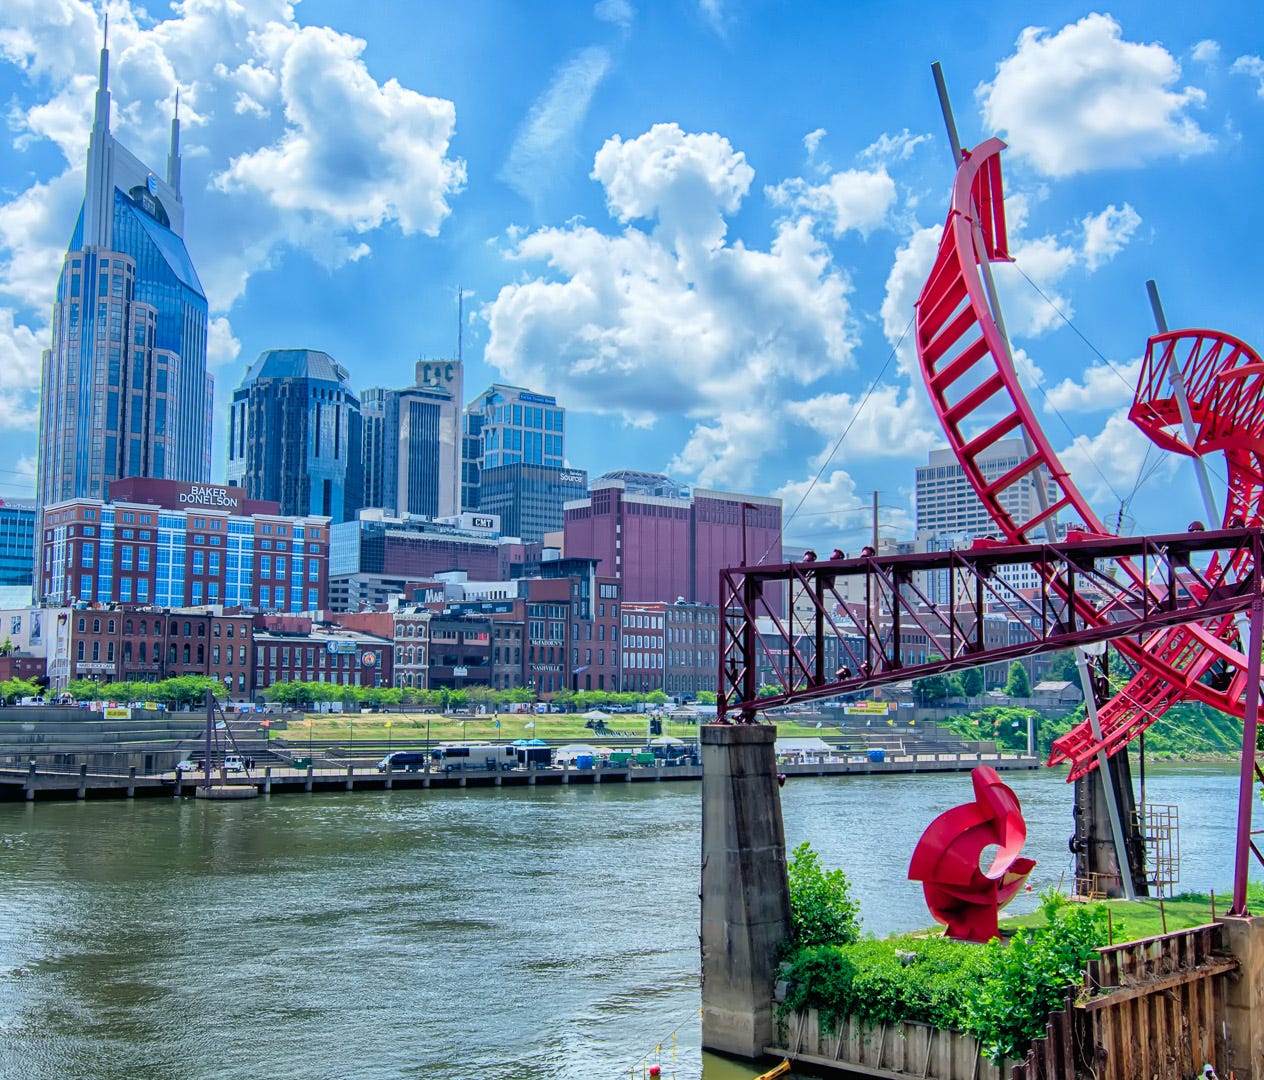 26. Nashville, Tenn. (Average hotel cost: $200, average flight cost: $581):  Another Southern city that made the list of affordable destinations for winter, Nashville is the place to explore historic sites on a budget. There's free music everywhere yo